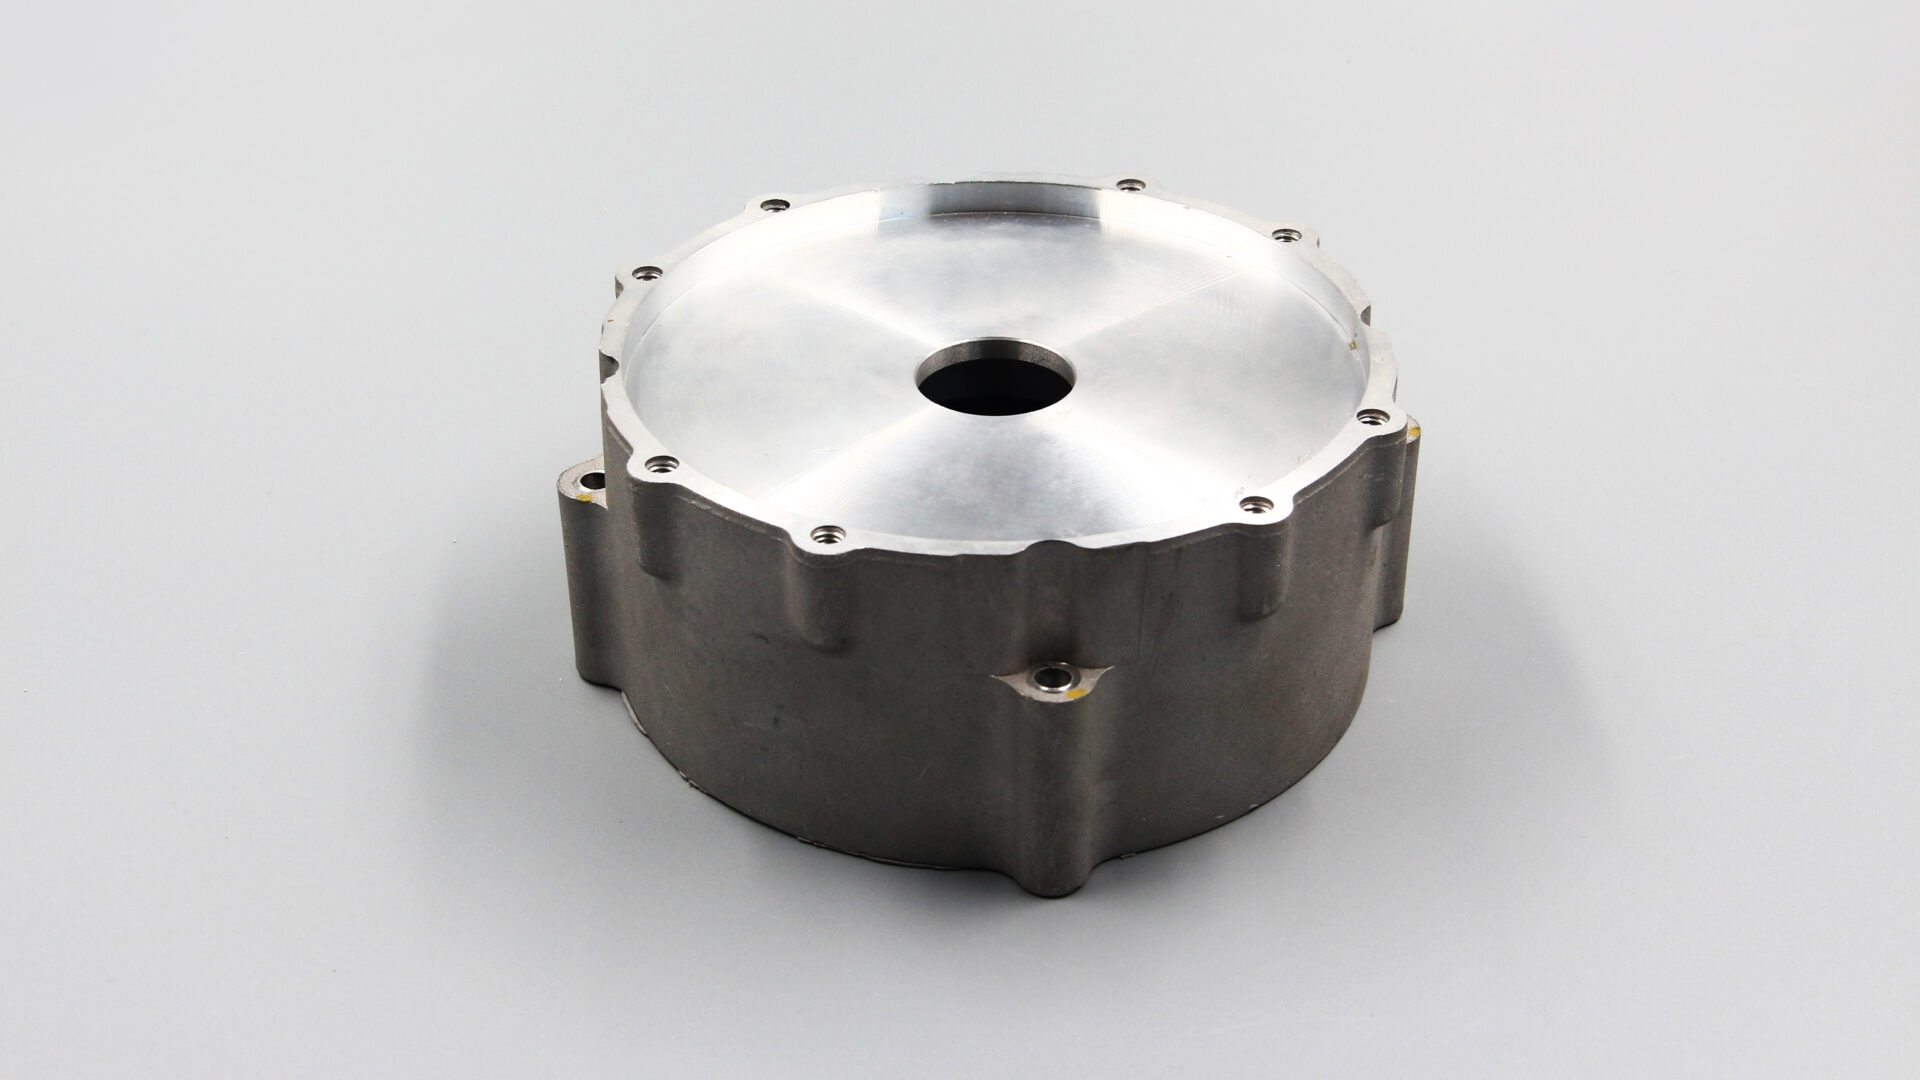 Partner With Medical Die Casting Experts